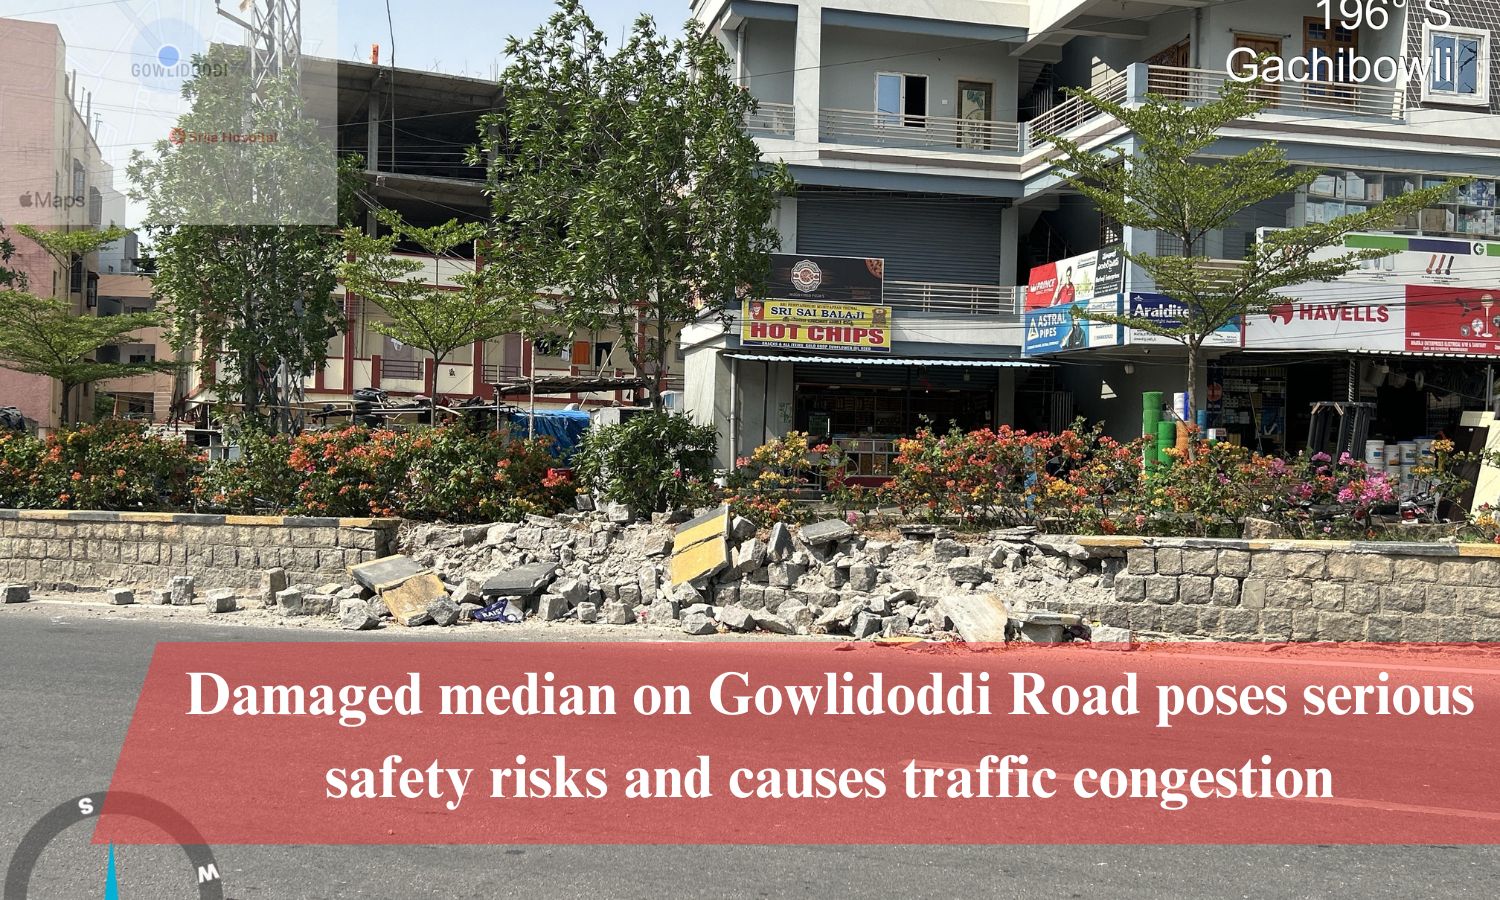 Damaged Median On Gowlidoddi Road Poses Serious Safety Risks And Causes Traffic Congestion